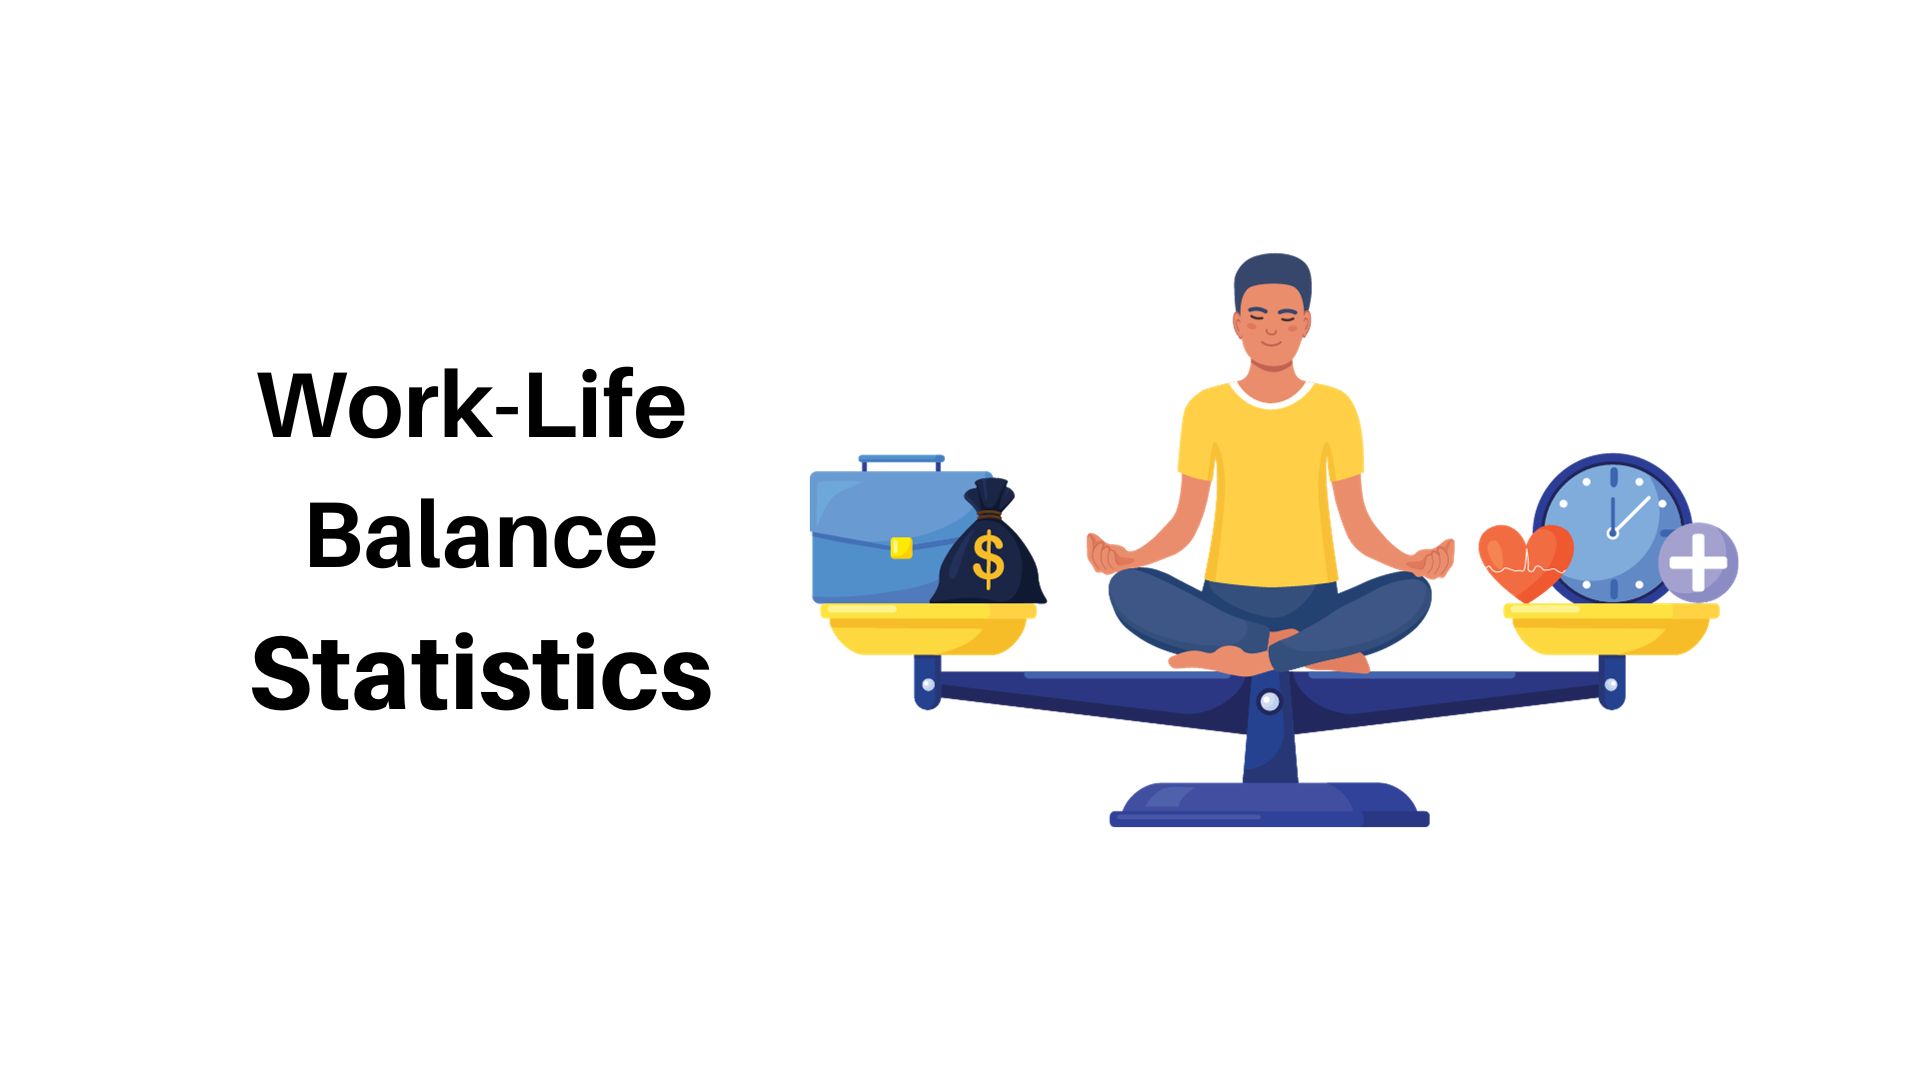 Work-Life Balance Statistics By Facts, Importance, Burnout, Flexible vs. Non-Flexible and Barriers